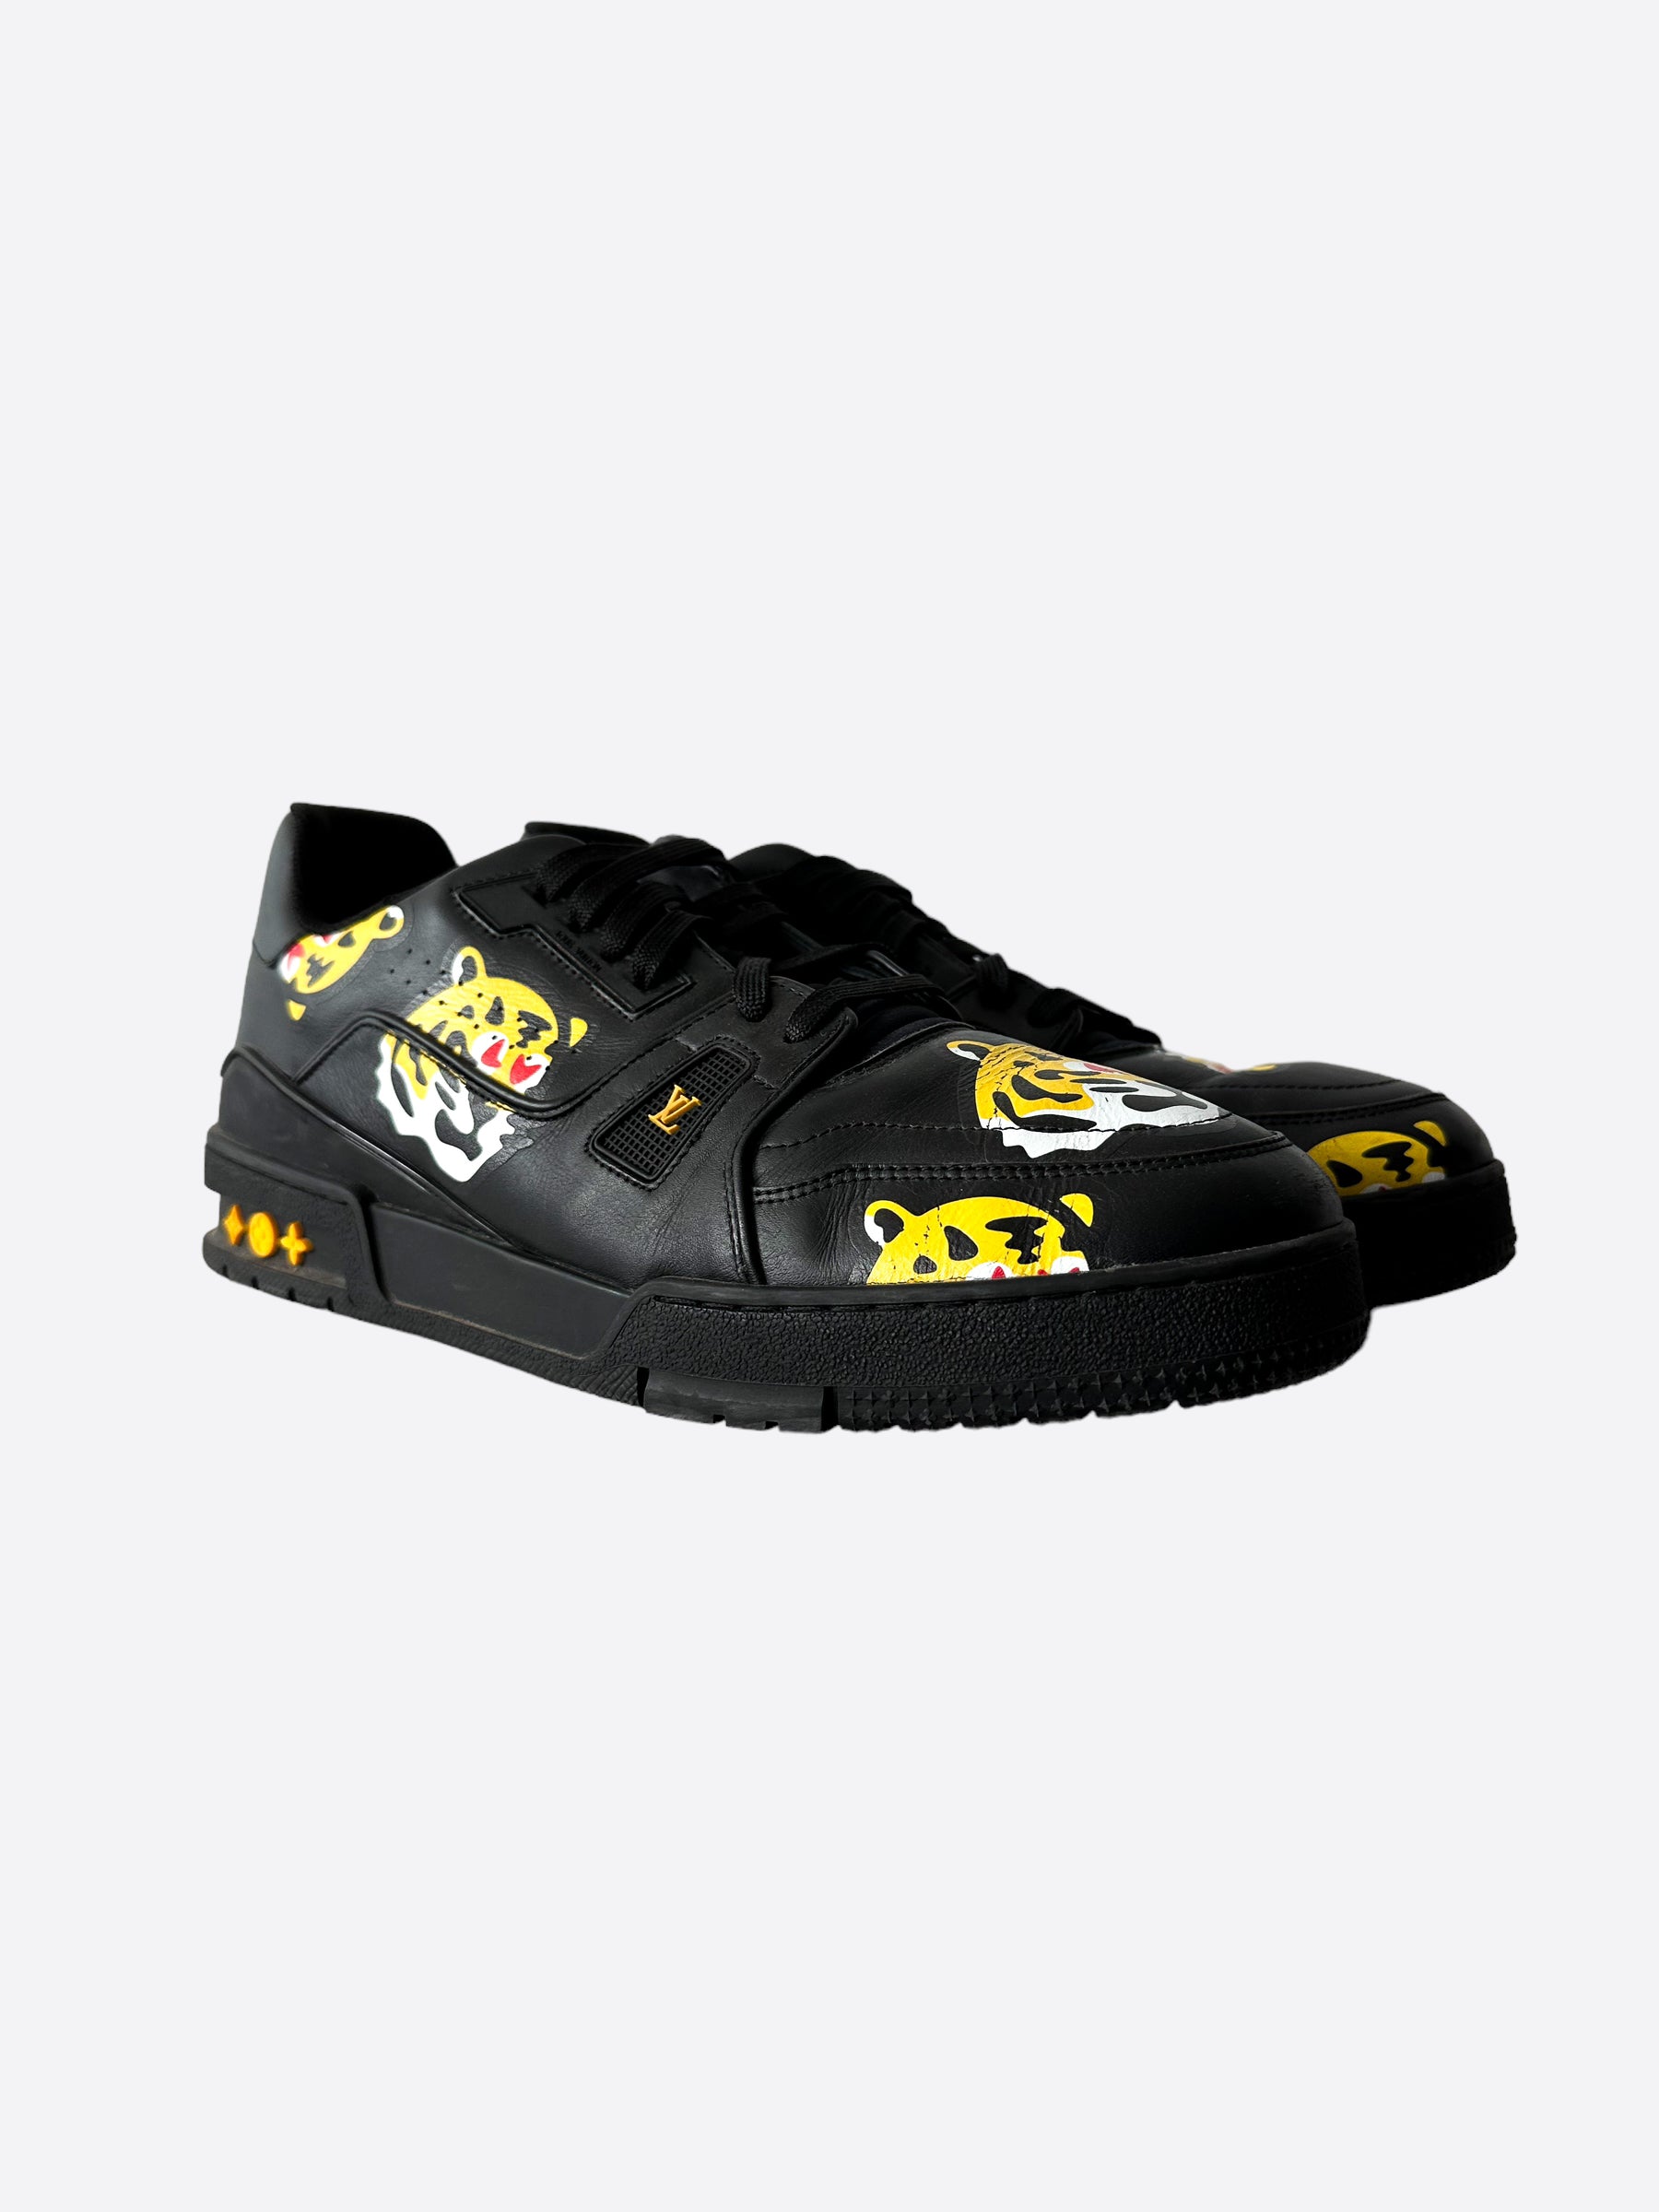 black and yellow louis vuitton shoes